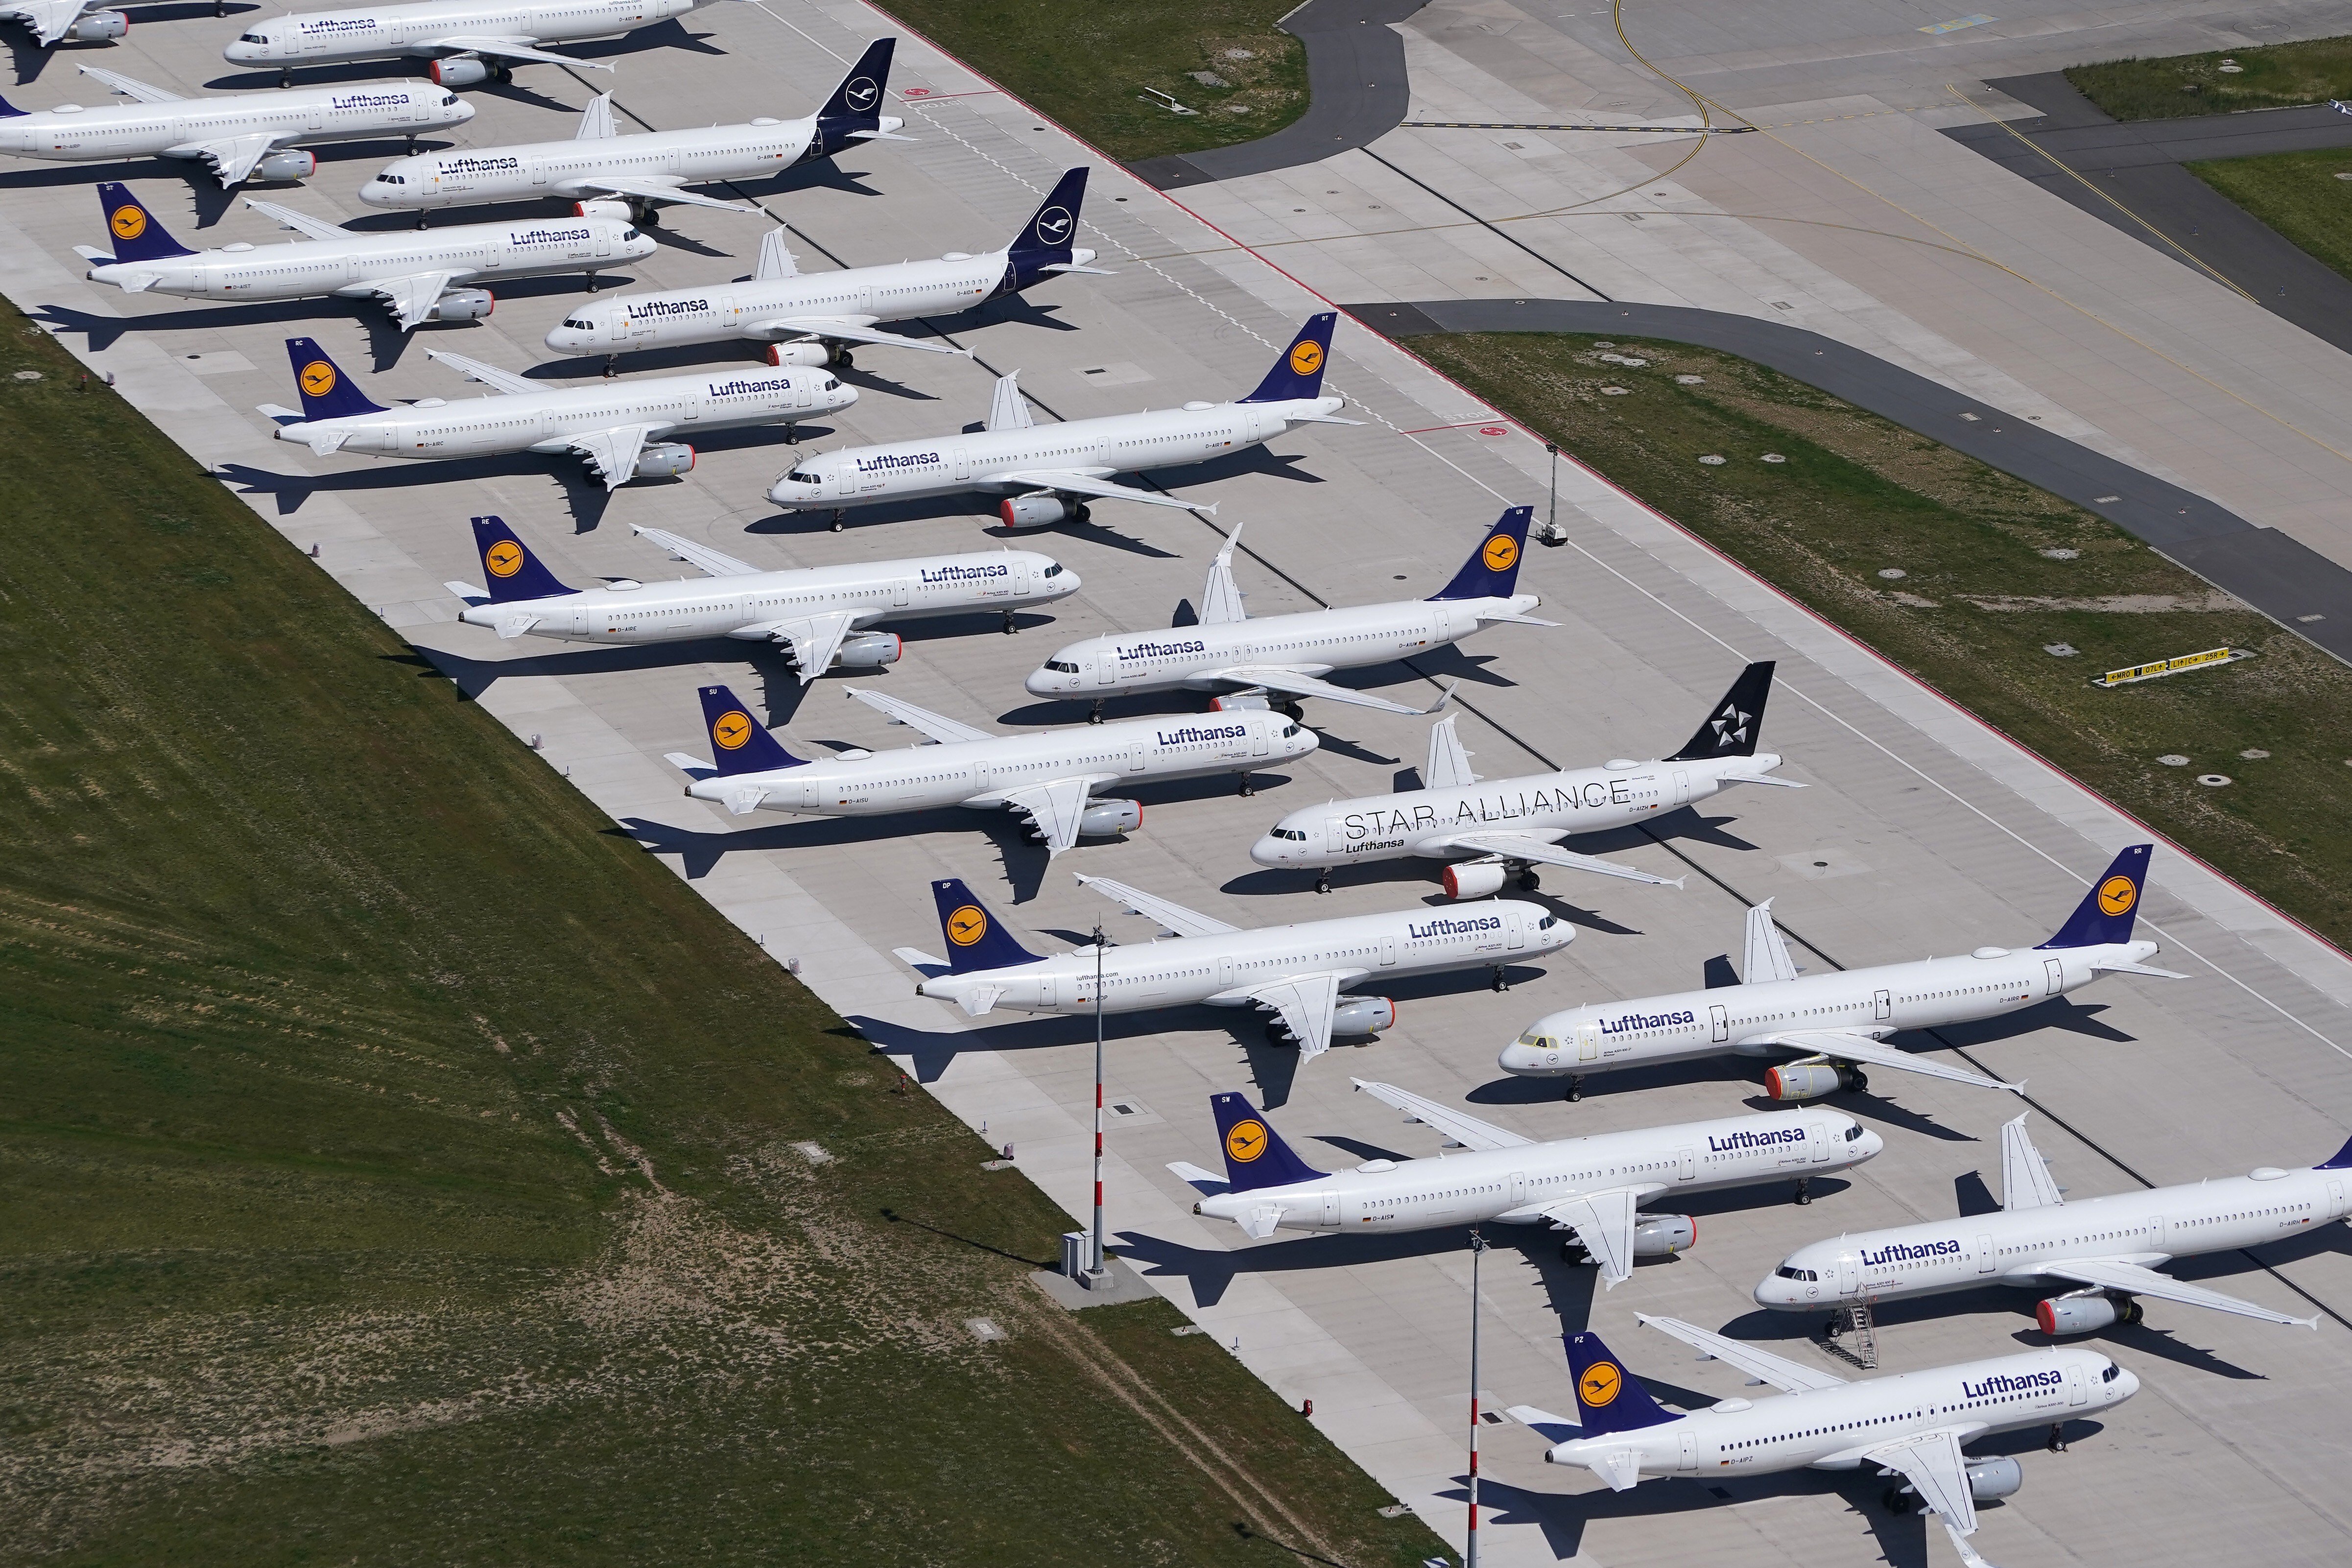 With planes grounded and demand weak, airlines face a financial crunch. Photo: Sean Gallup/Getty Images